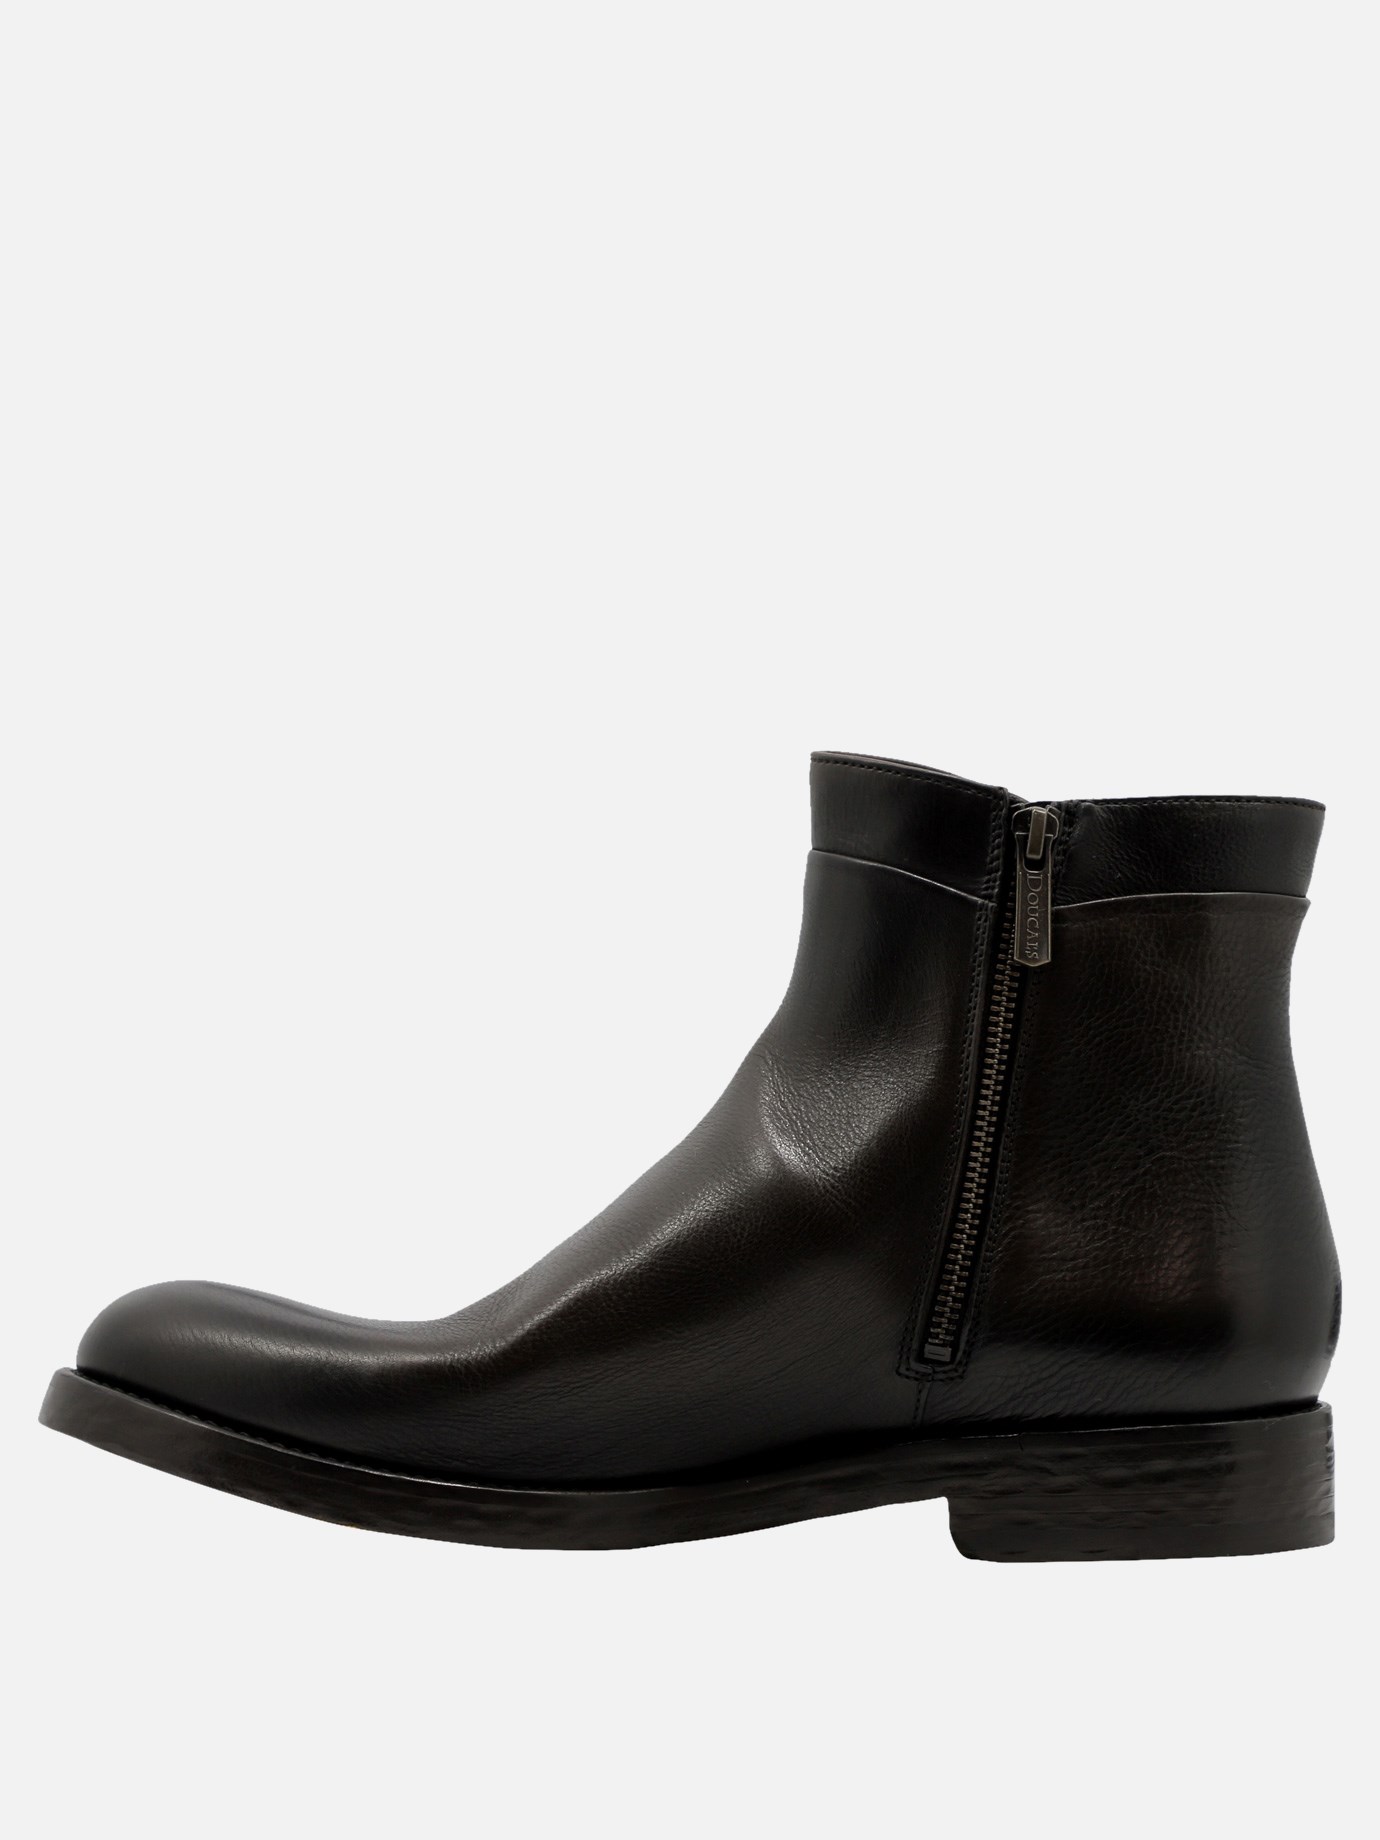 Ankle boots with side zip by Doucal's